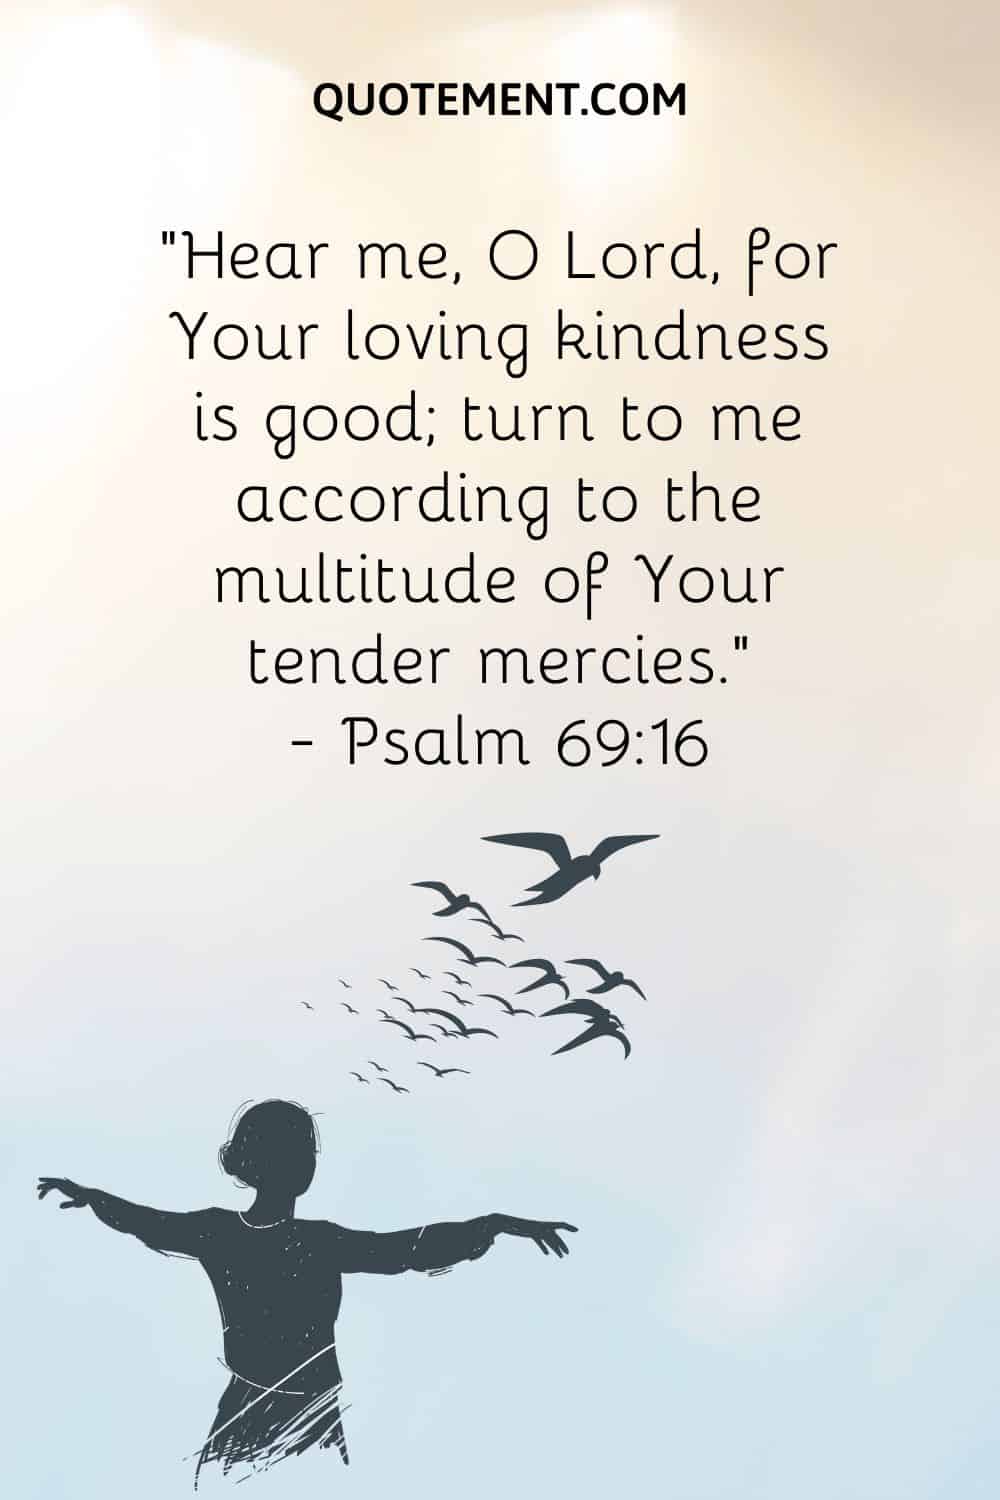 “Hear me, O Lord, for Your loving kindness is good; turn to me according to the multitude of Your tender mercies.” ― Psalm 6916